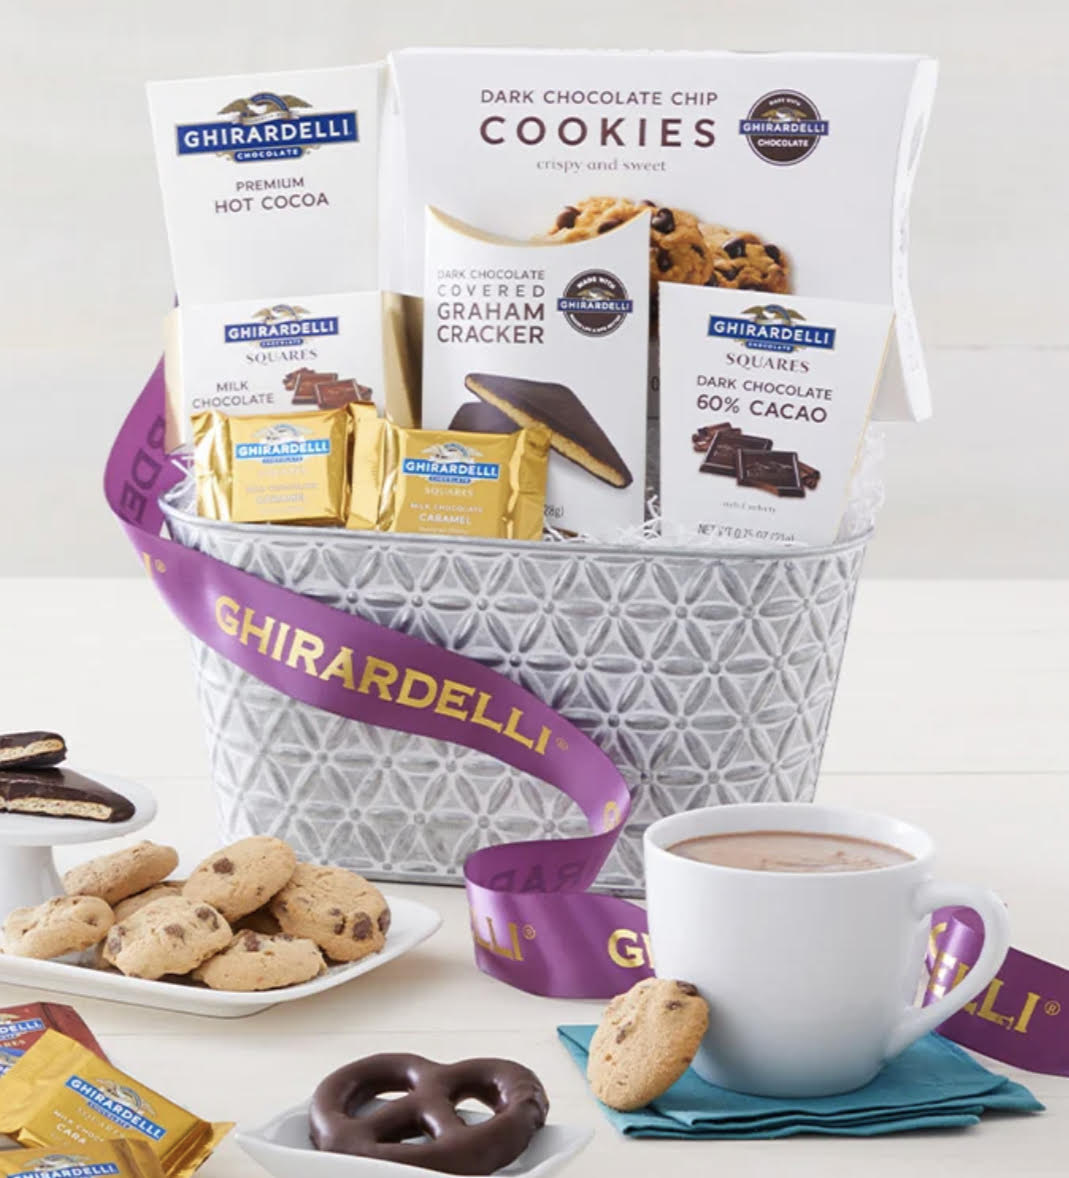 Classic Ghirardelli Gift Basket - Share an abundant gift basket filled with some of Ghiardelli’s best. Finished with a beautiful ribbon, each embossed silver metal basket is brimming with classics like rich chocolate chip cookies, smooth hot cocoa mix, and decadent chocolate squares. Choose from the Deluxe, Grande, and Supreme options for an increasingly indulgent chocolate assortment designed to impress.  